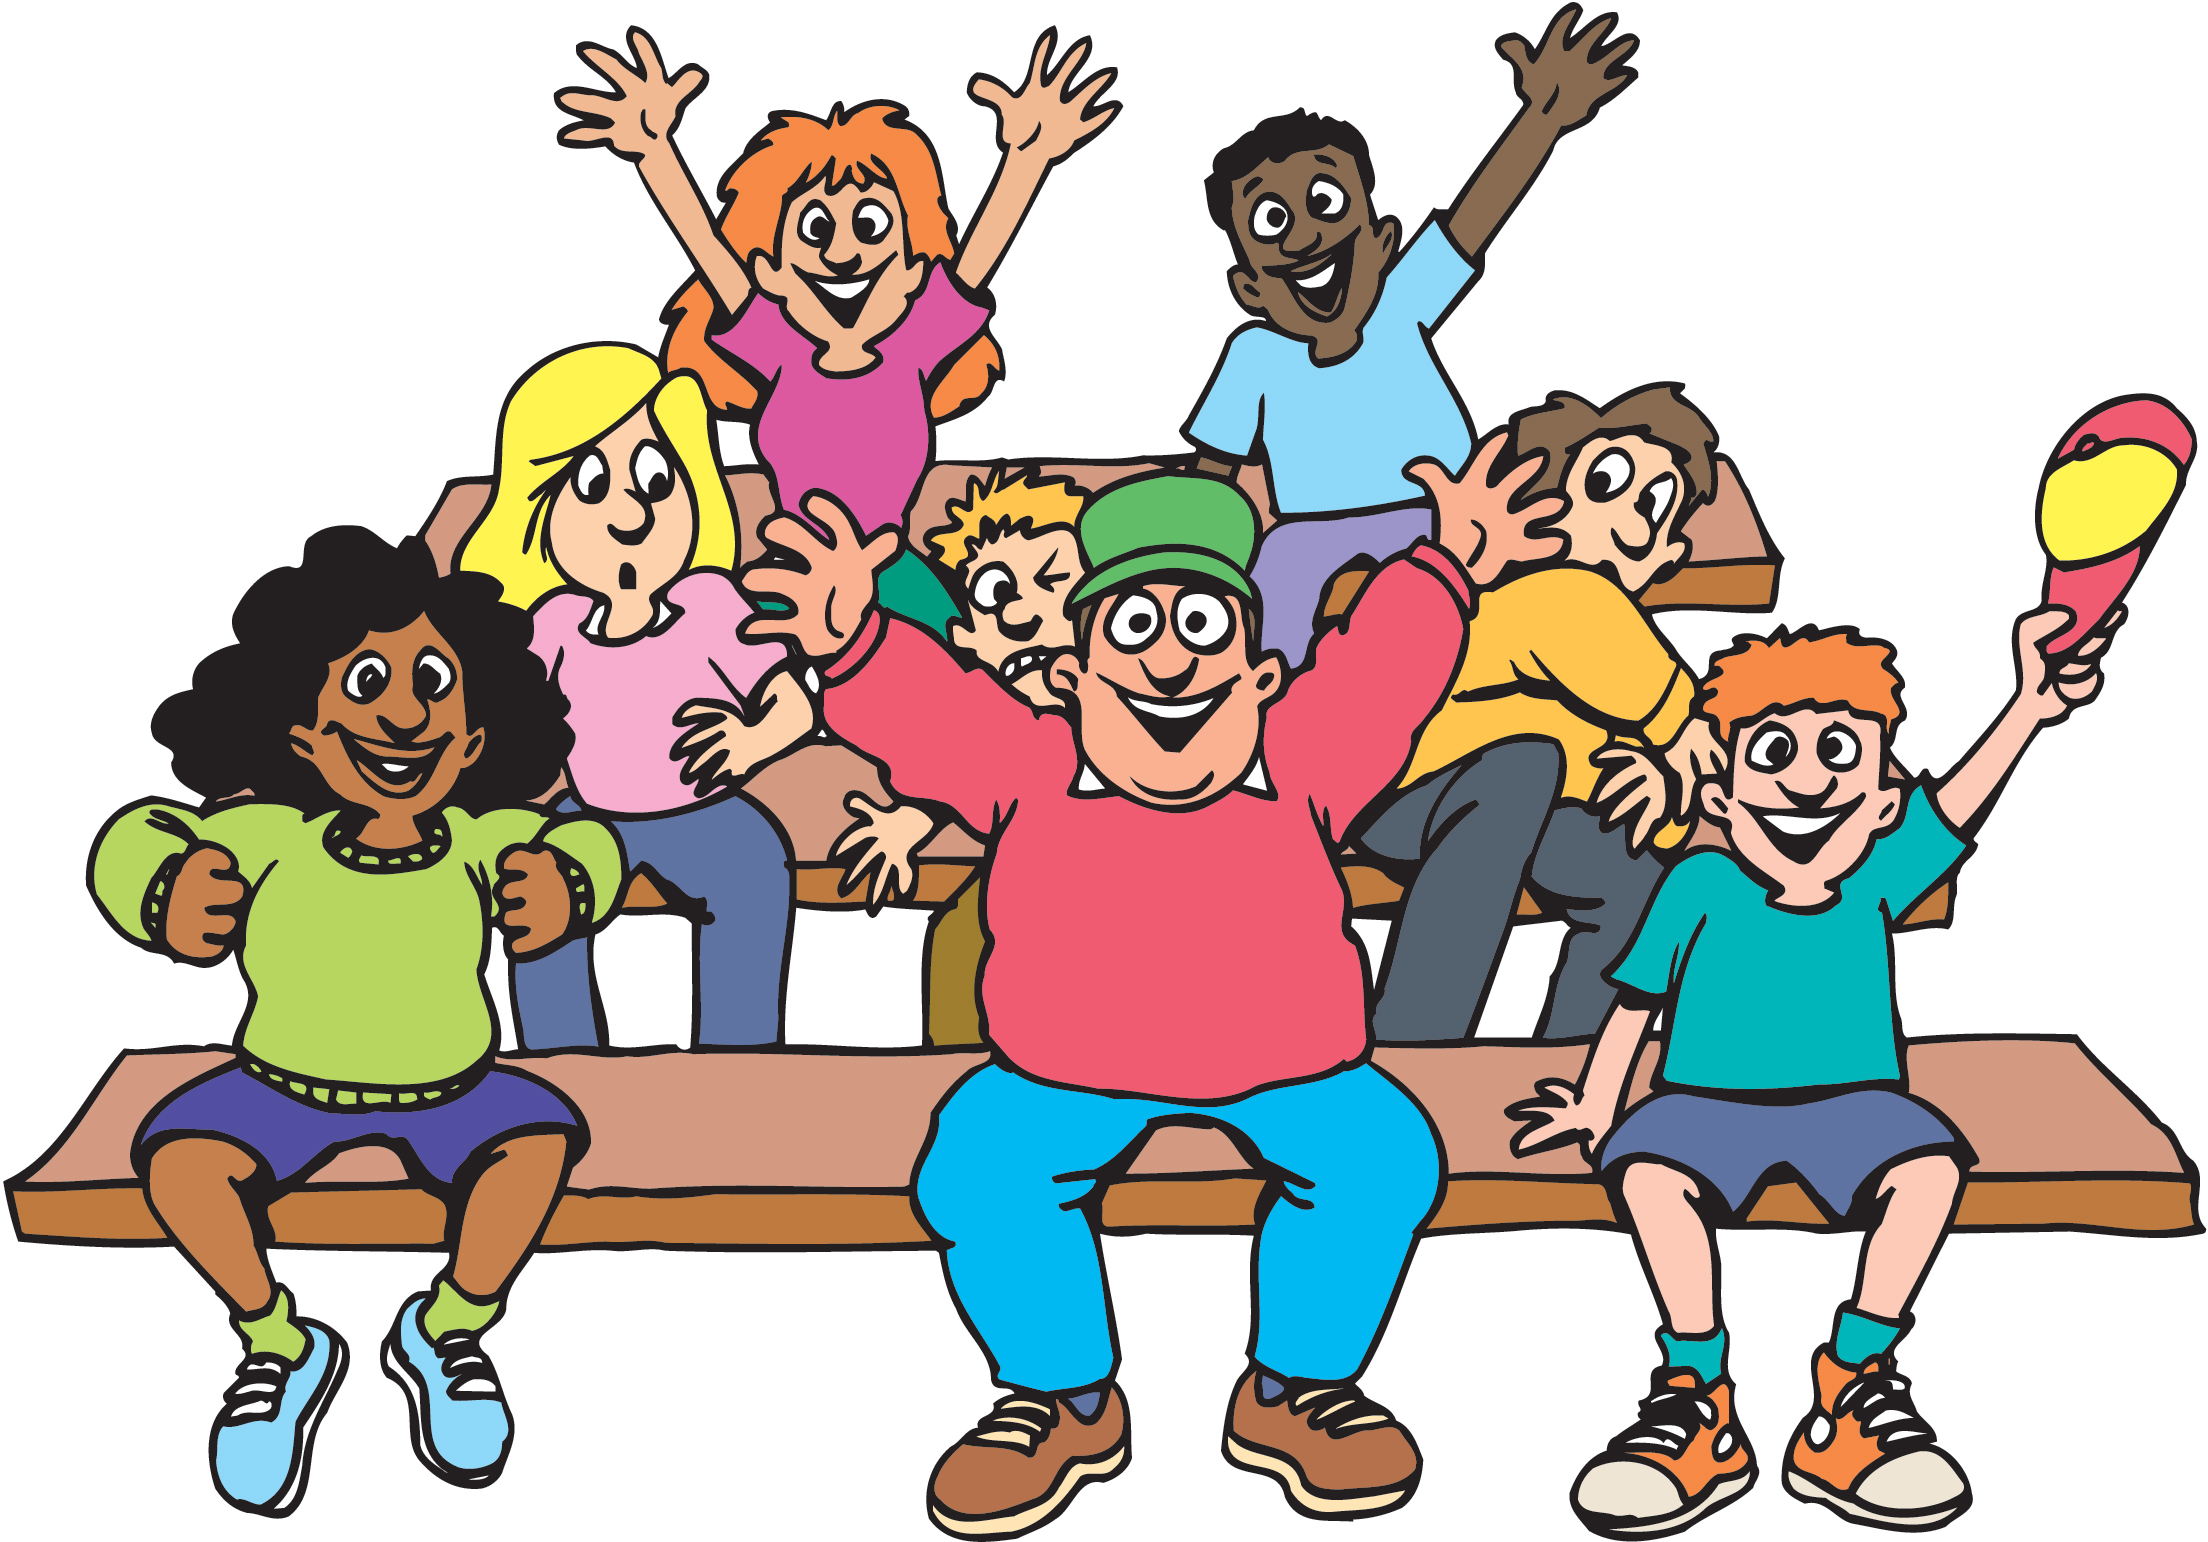 Iclipart & I Clip Art Images - HDClipartAll Elementary School Assembly Clipart